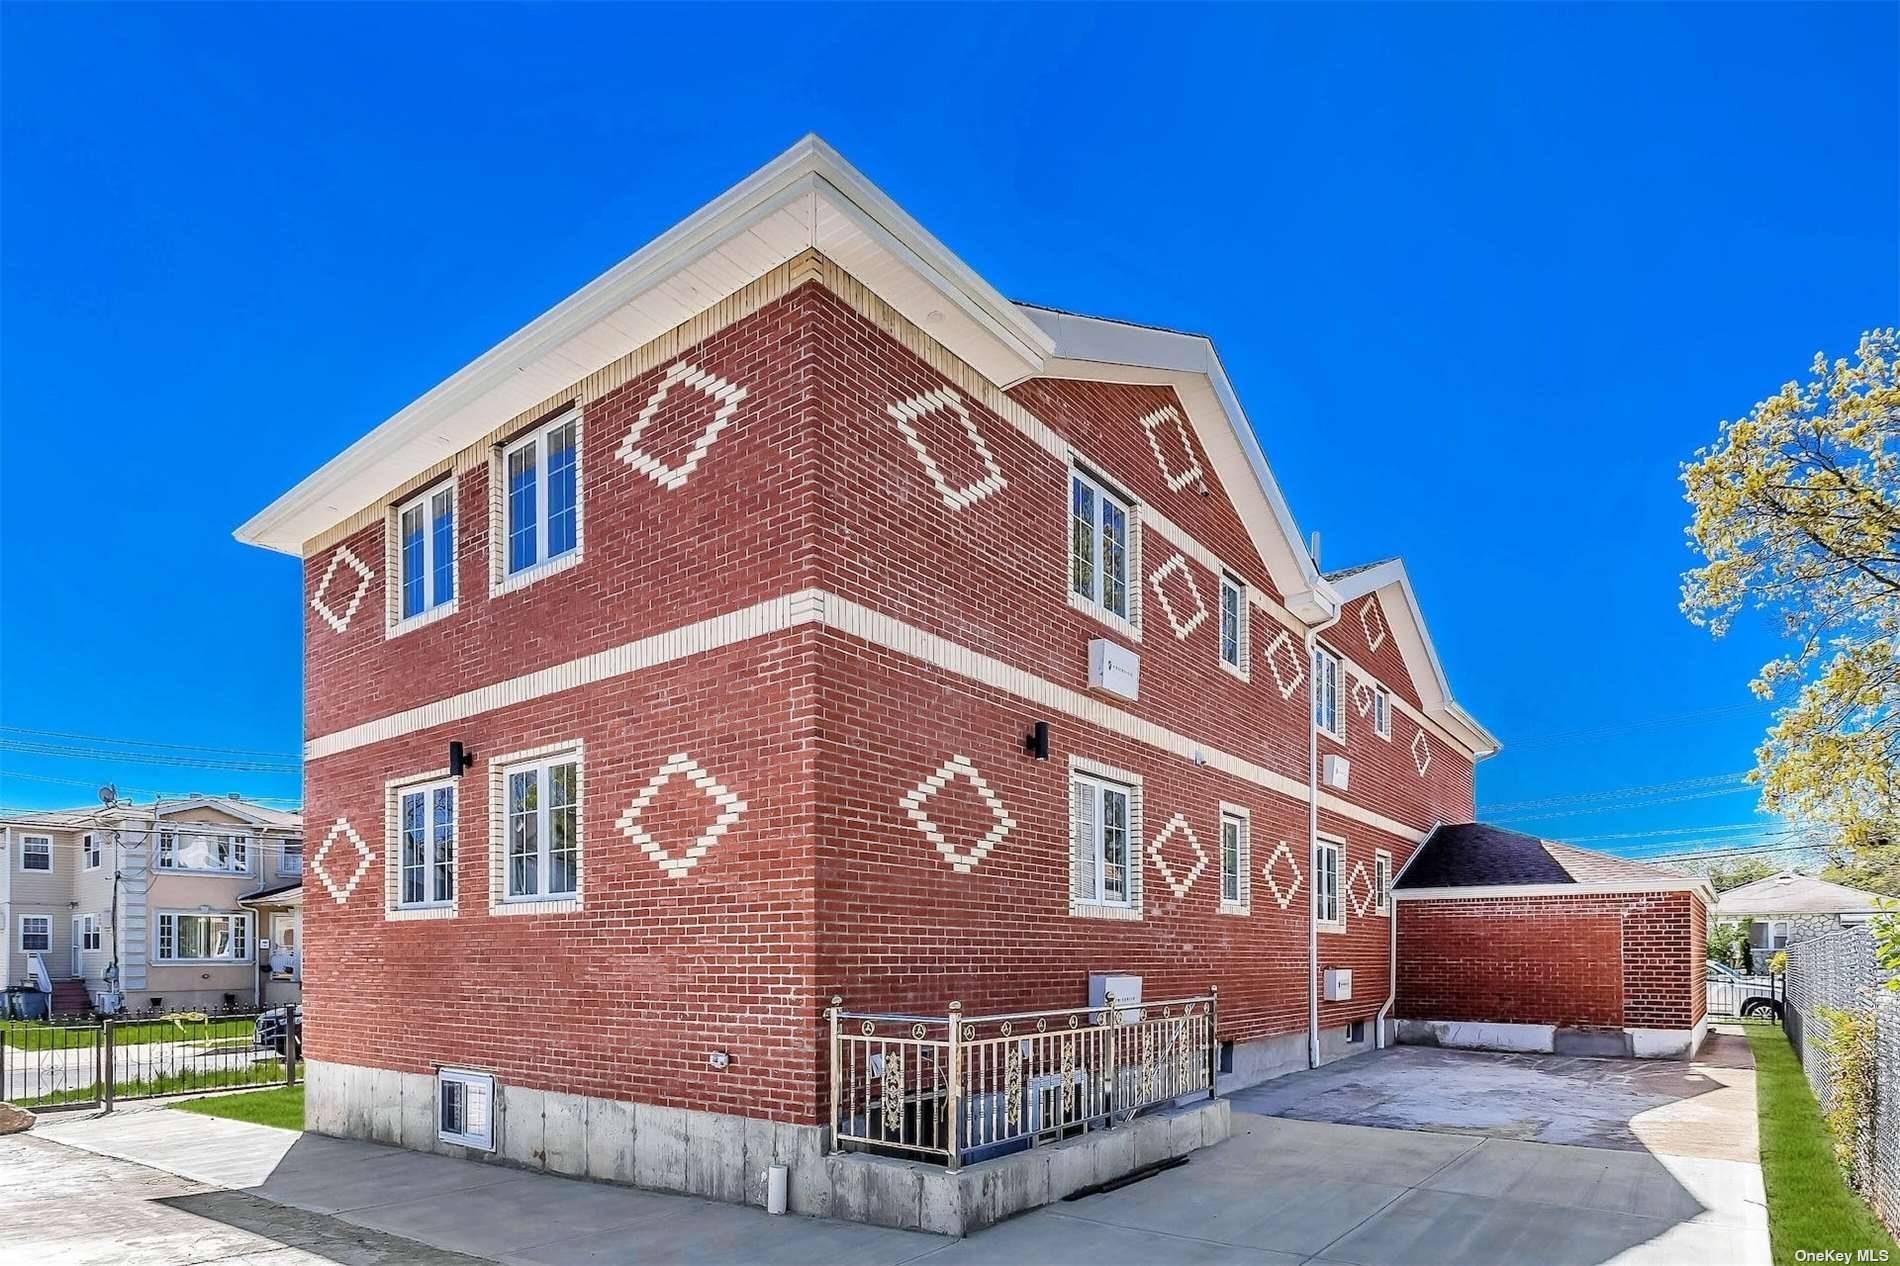 One of a kind extra large corner lot 49X125 solid brick 10 bedroom, 5 full baths located in prime location of Rosedale.